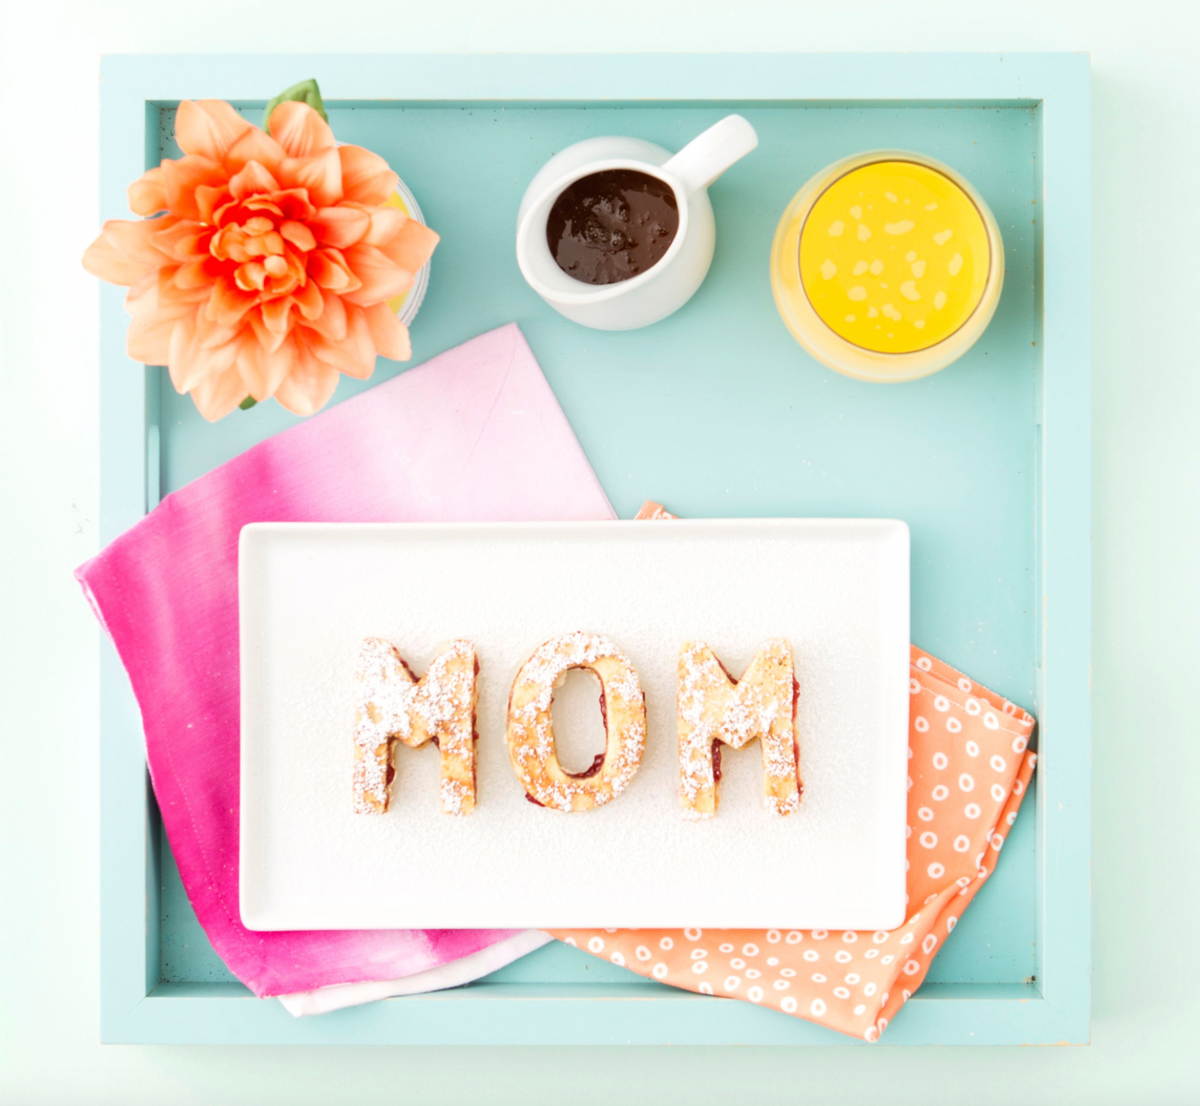 mother's day traditions around the world